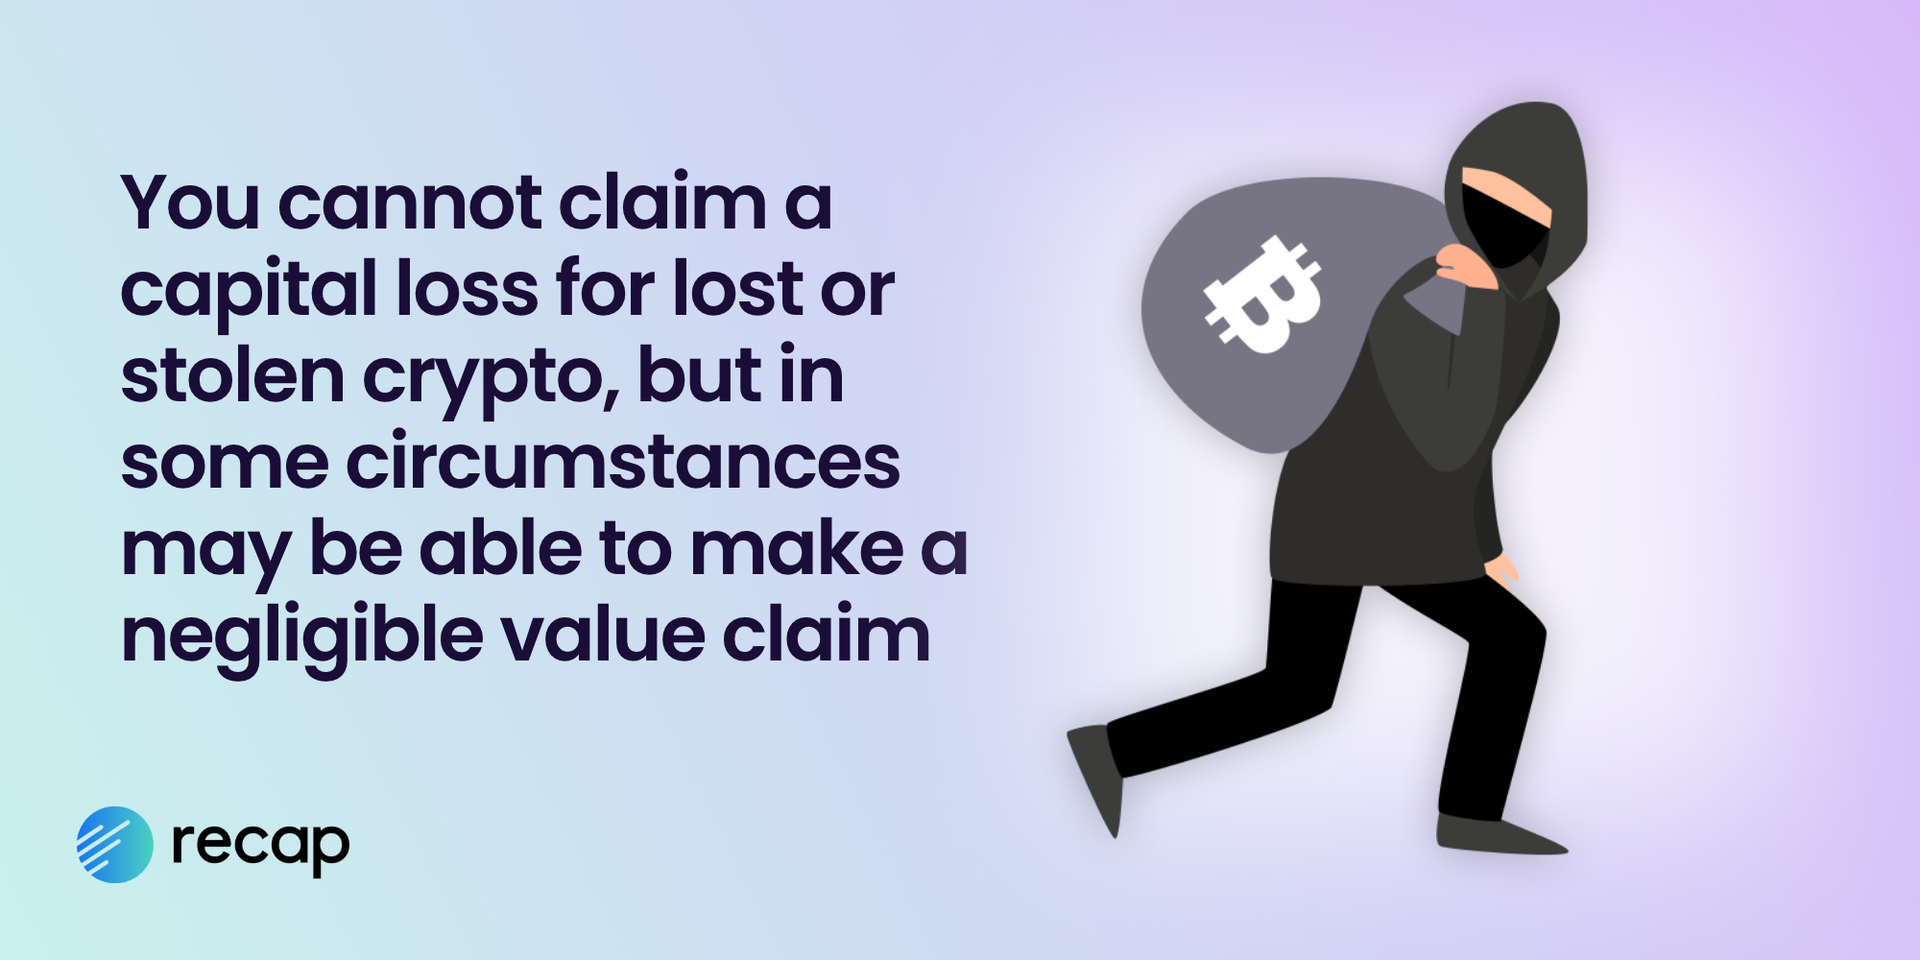 Infographic stating that in the UK, you cannot claim a capital loss for lost or stolen crypto, but may be able to make a negligible value claim.